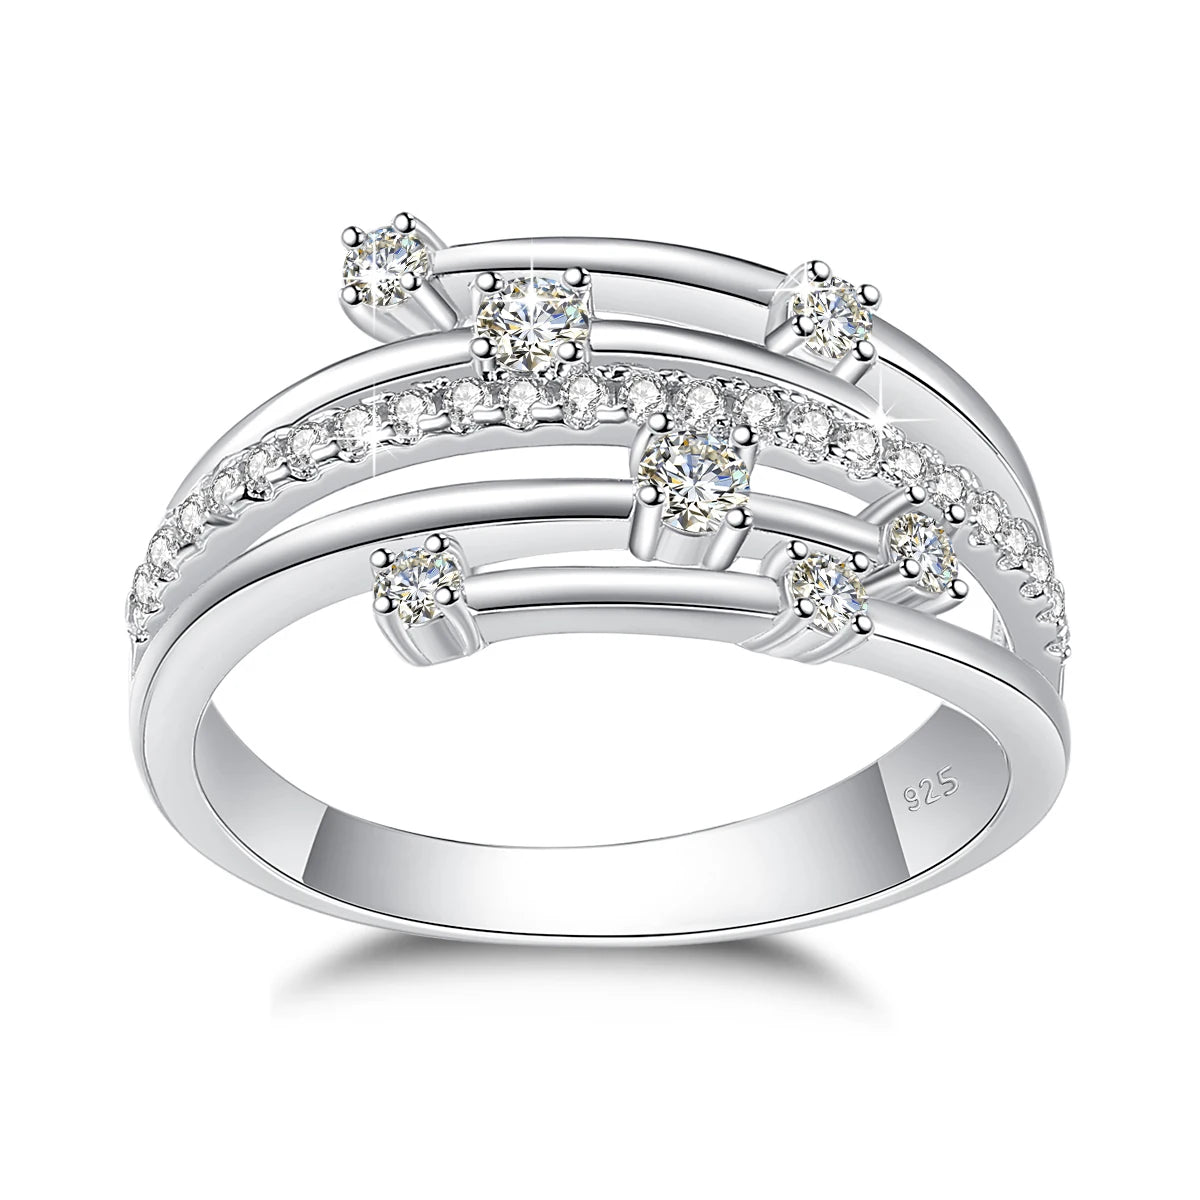 A stunning Szjinao Trendy Moissanite Ring Eternity Wedding Band Solid 925 Silver Rings For Women Jewelry Engagement Gift Dropship Supplier crafted from 925 sterling silver, adorned with multiple small diamonds arranged in a crisscross pattern on the top, perfect for a wedding by Maramalive™.